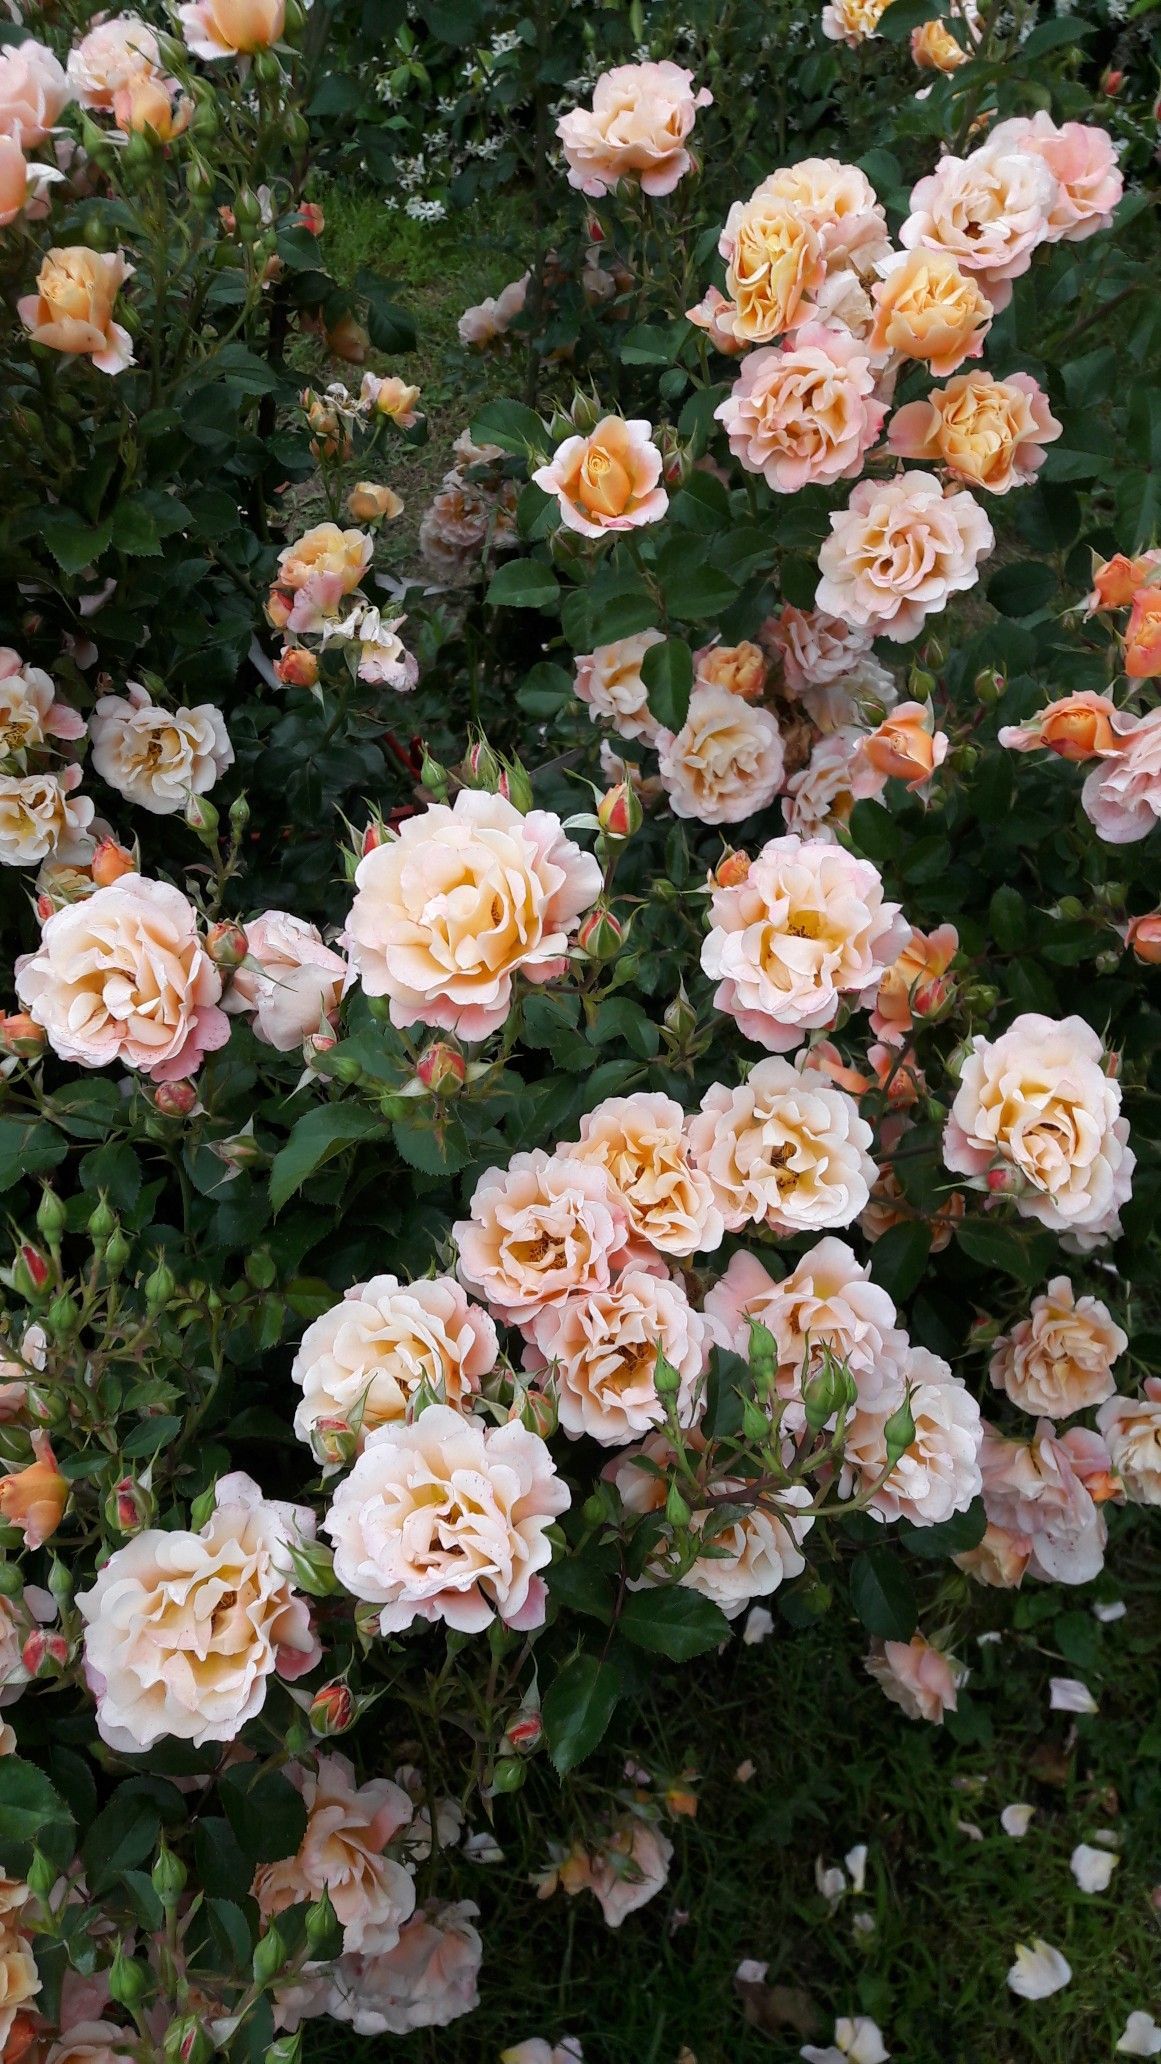 A bush of roses with many flowers - Spring, flower, garden